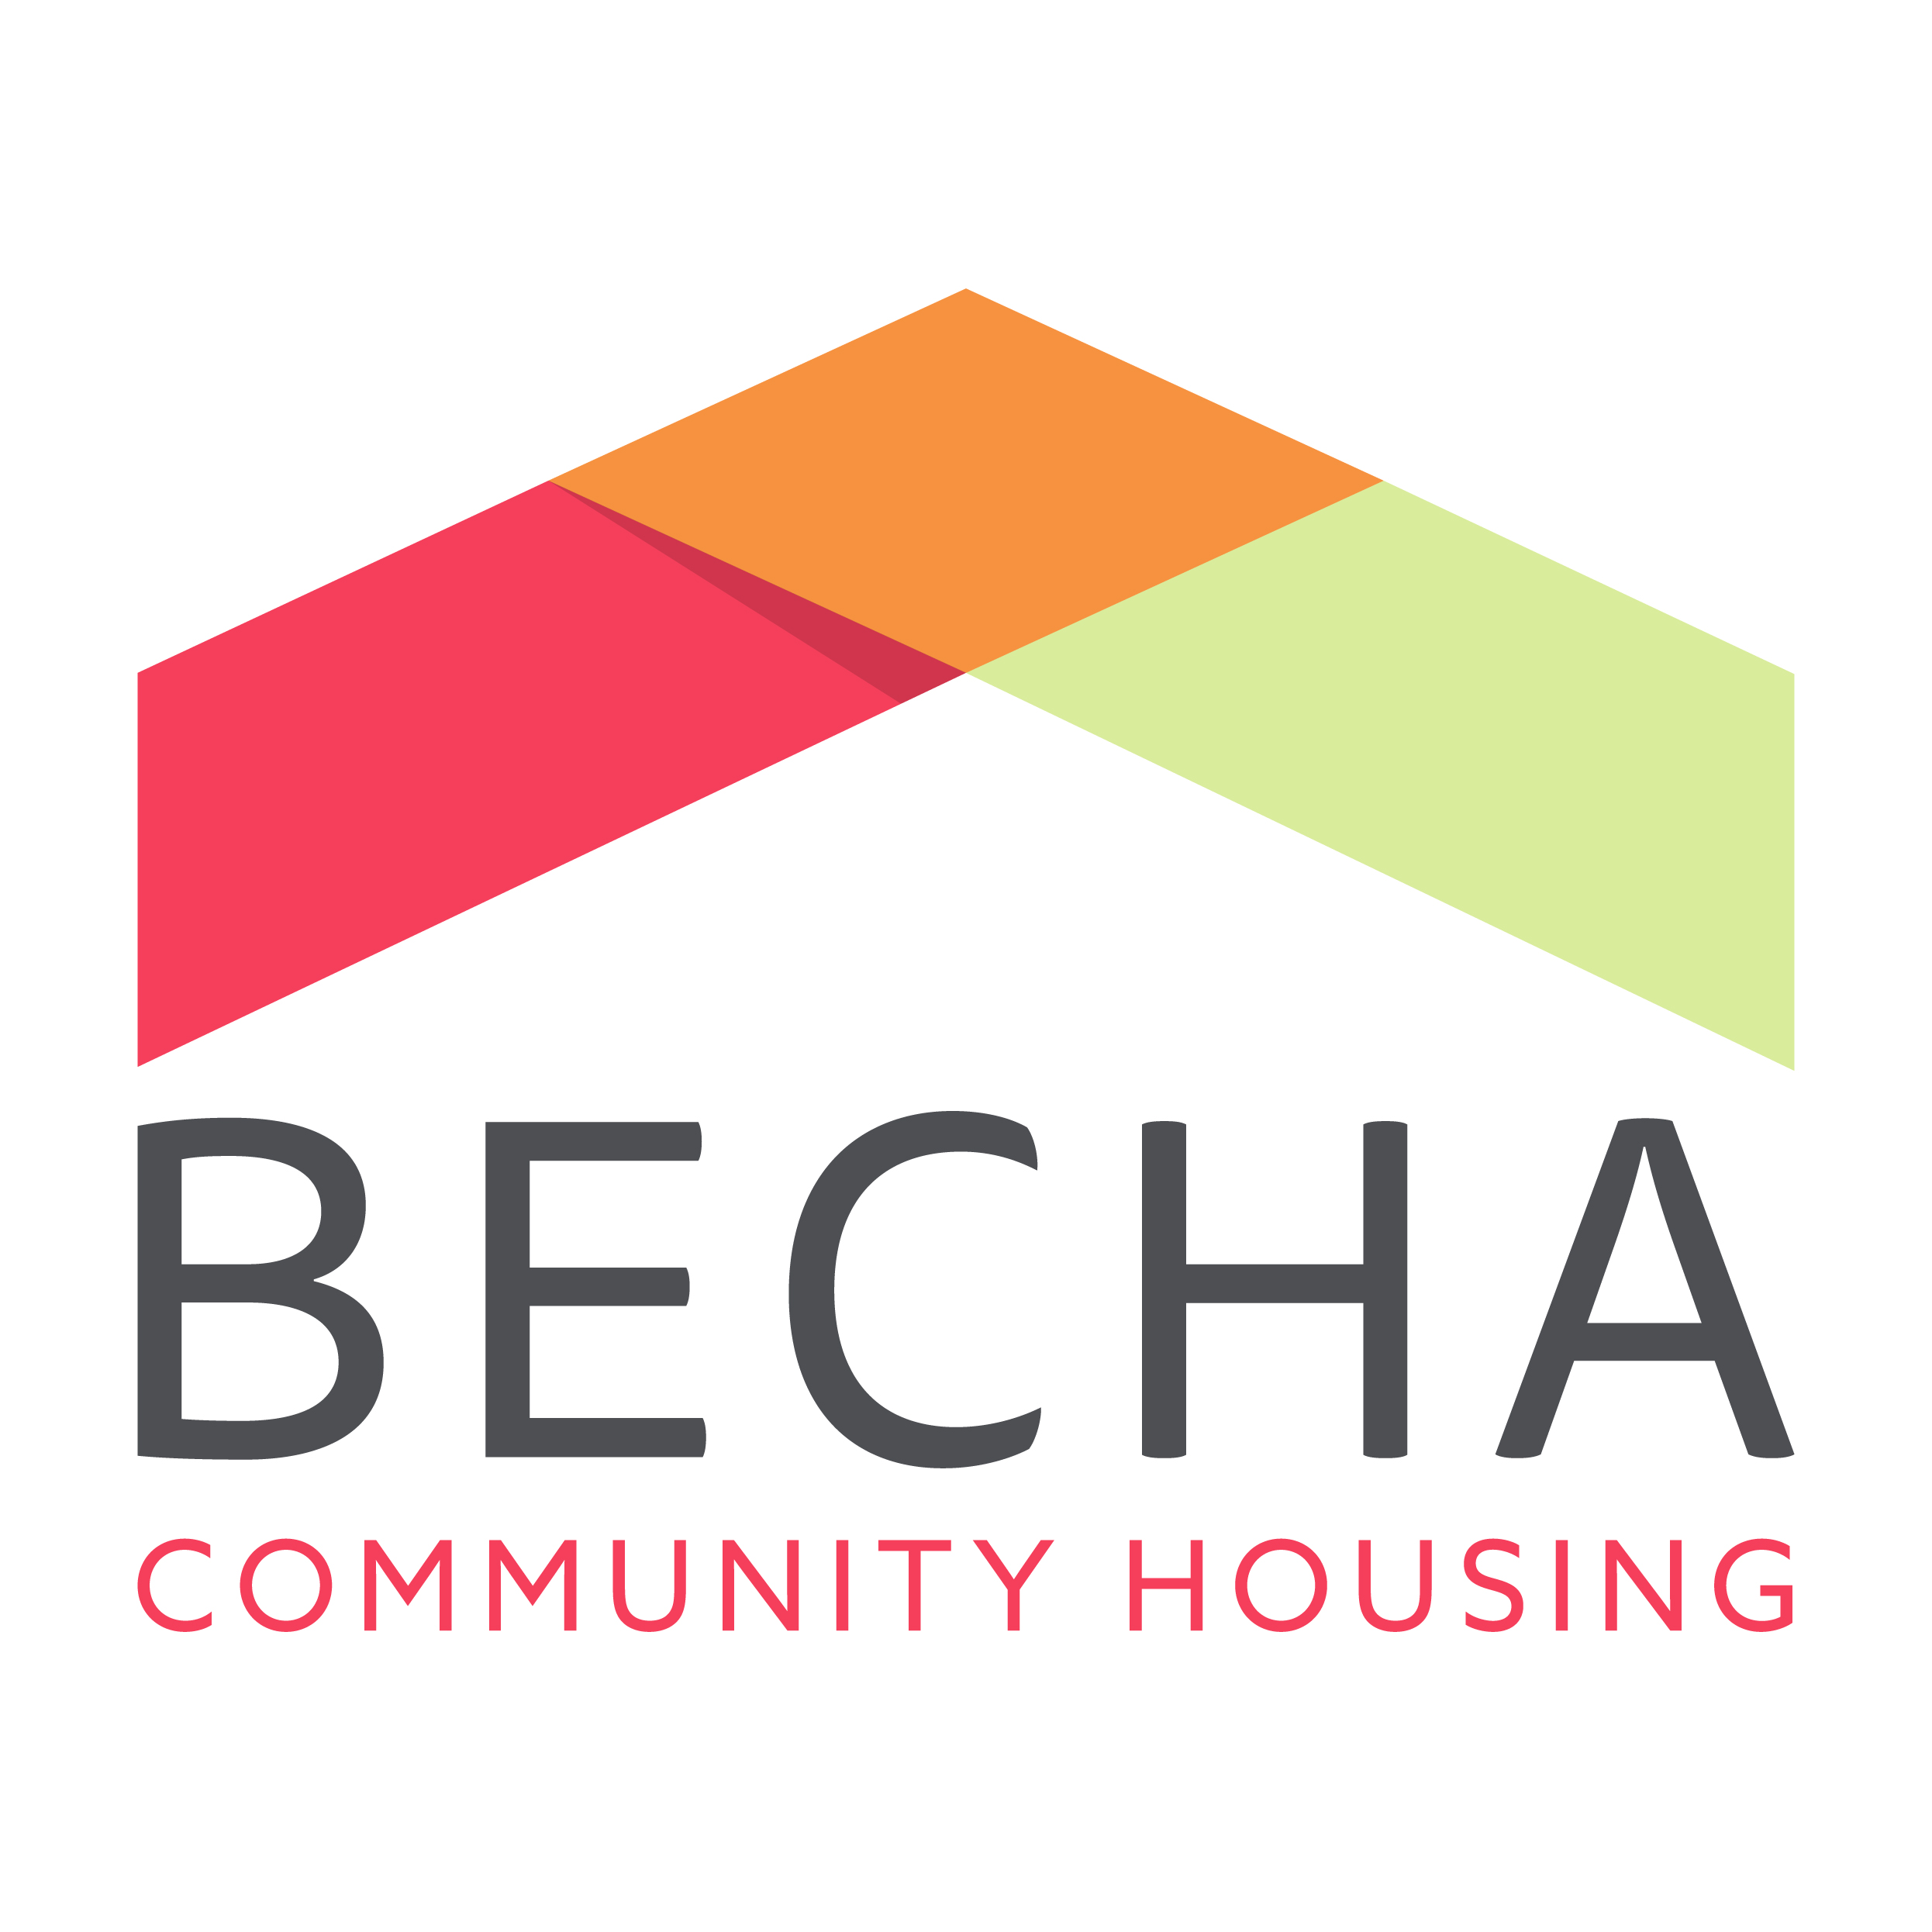 BECHA IS LOOKING FOR A NEW BOARD MEMBER BEXLEY